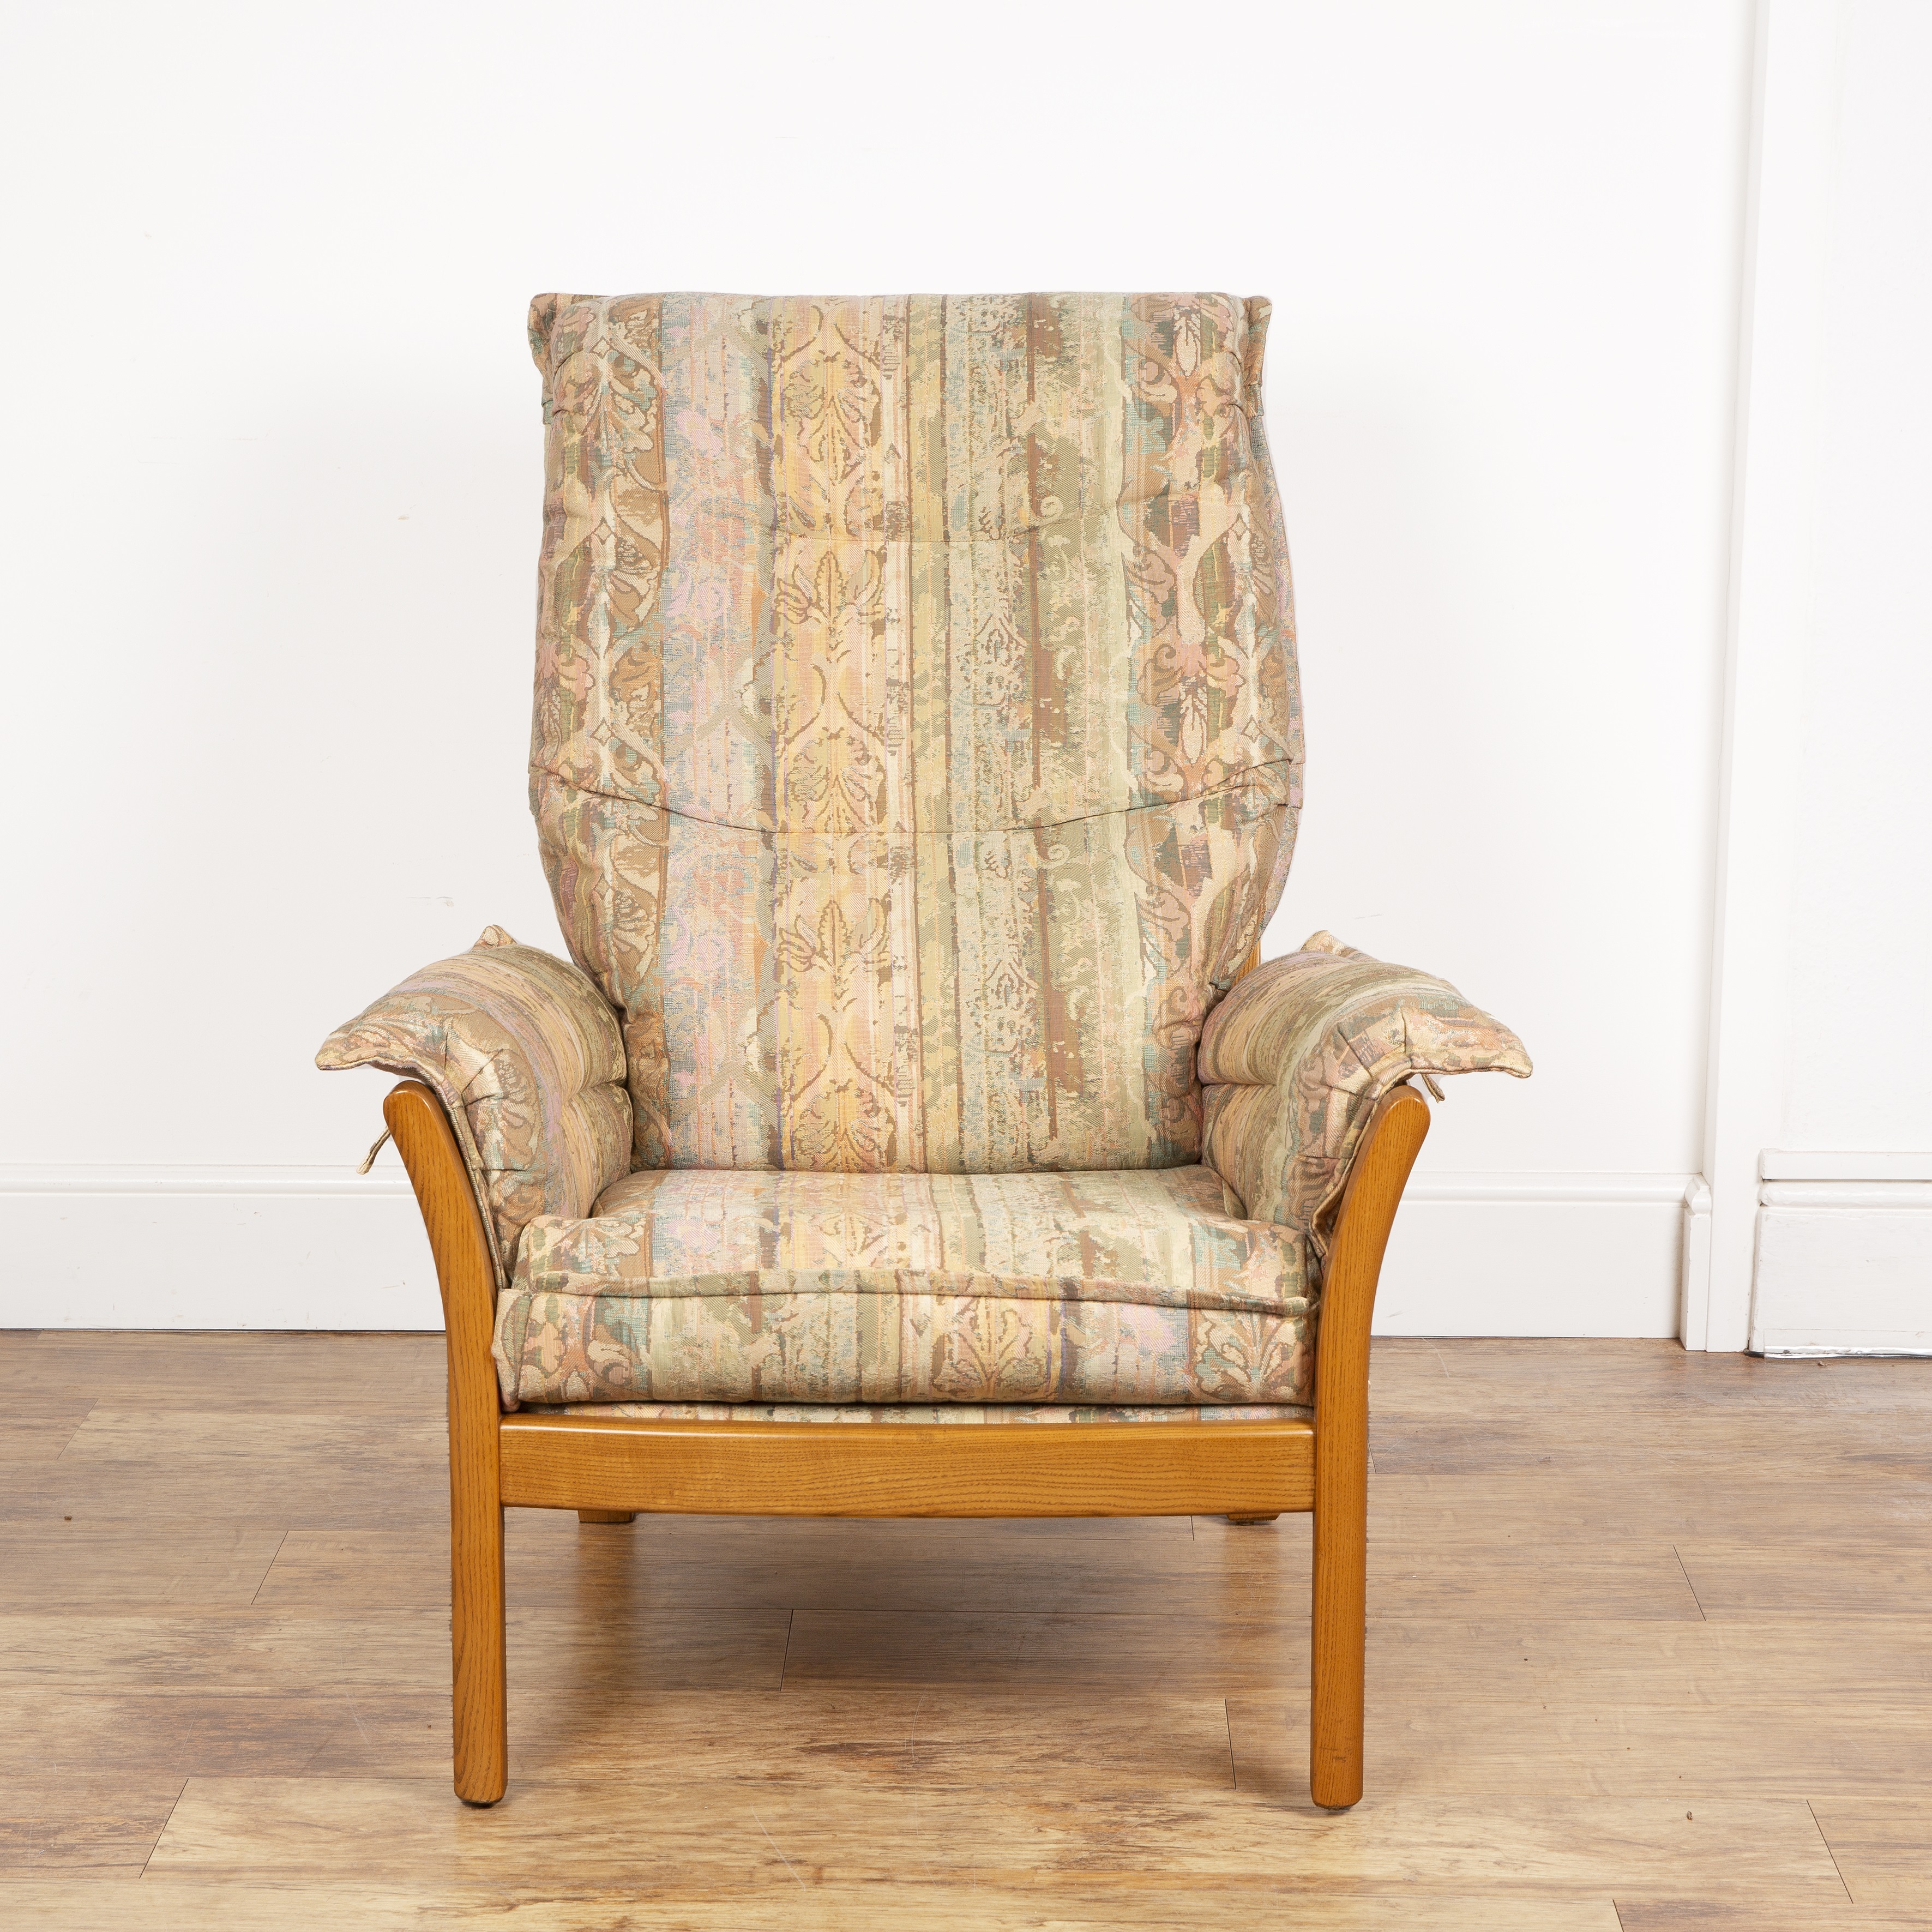 Ercol 'Saville' model '930' armchair, with labels to the seat, 103cm high overall including the